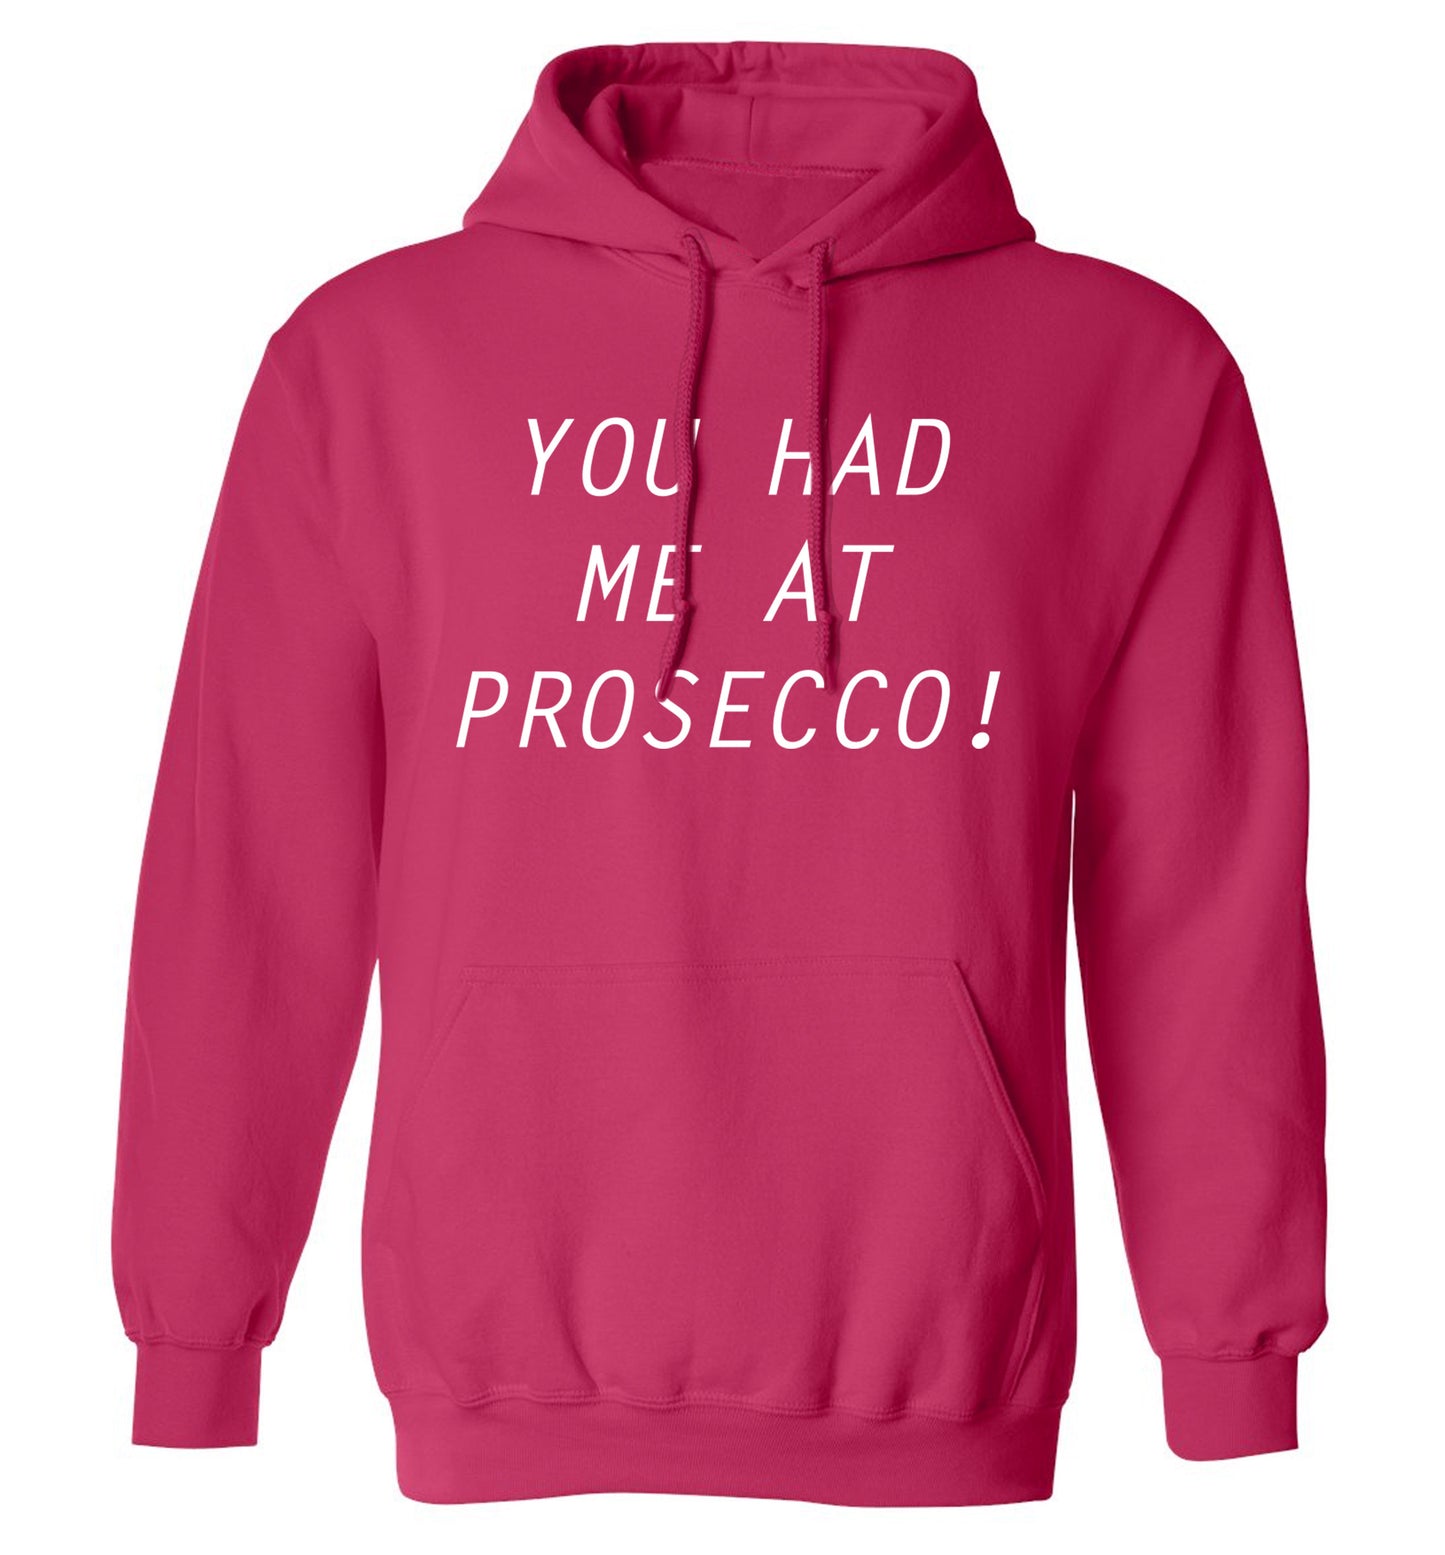 You had me at prosecco adults unisex pink hoodie 2XL